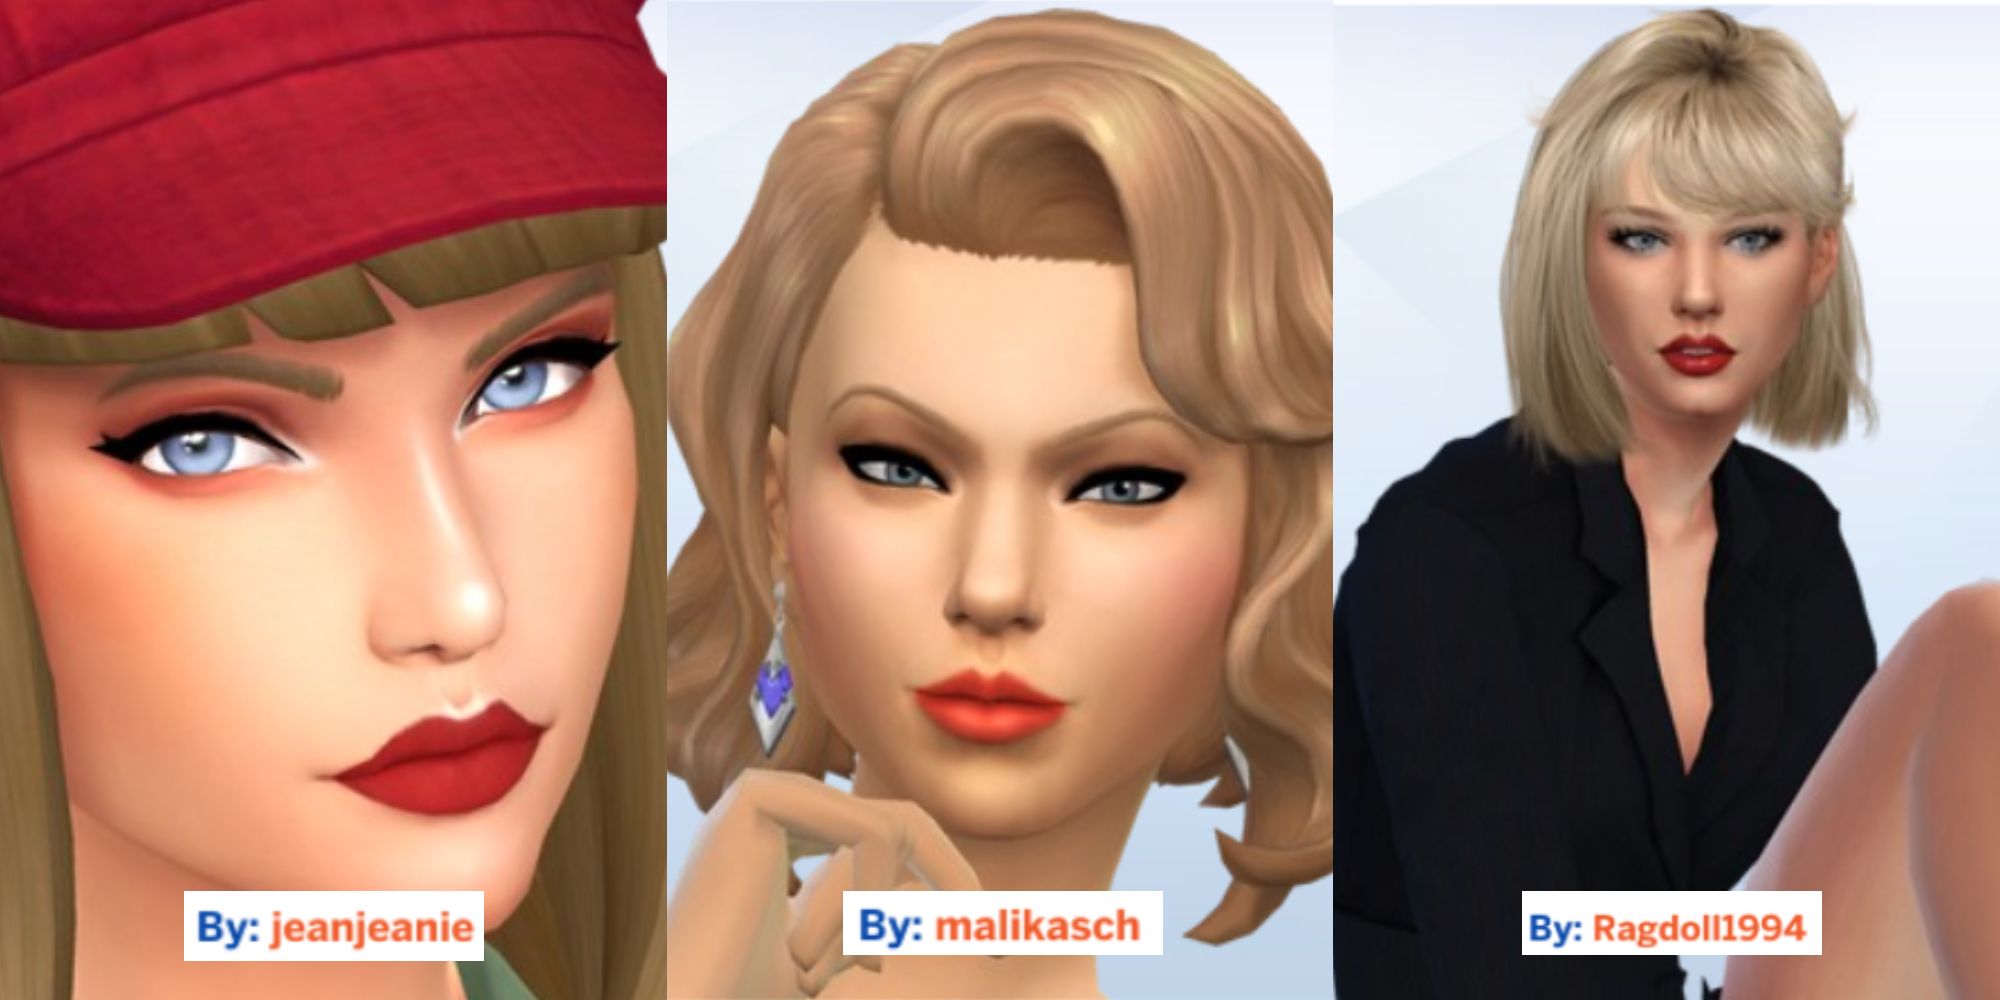 Mirror real life faces, like Taylor Swift's, in The Sims 4 to break same-face syndrome habits